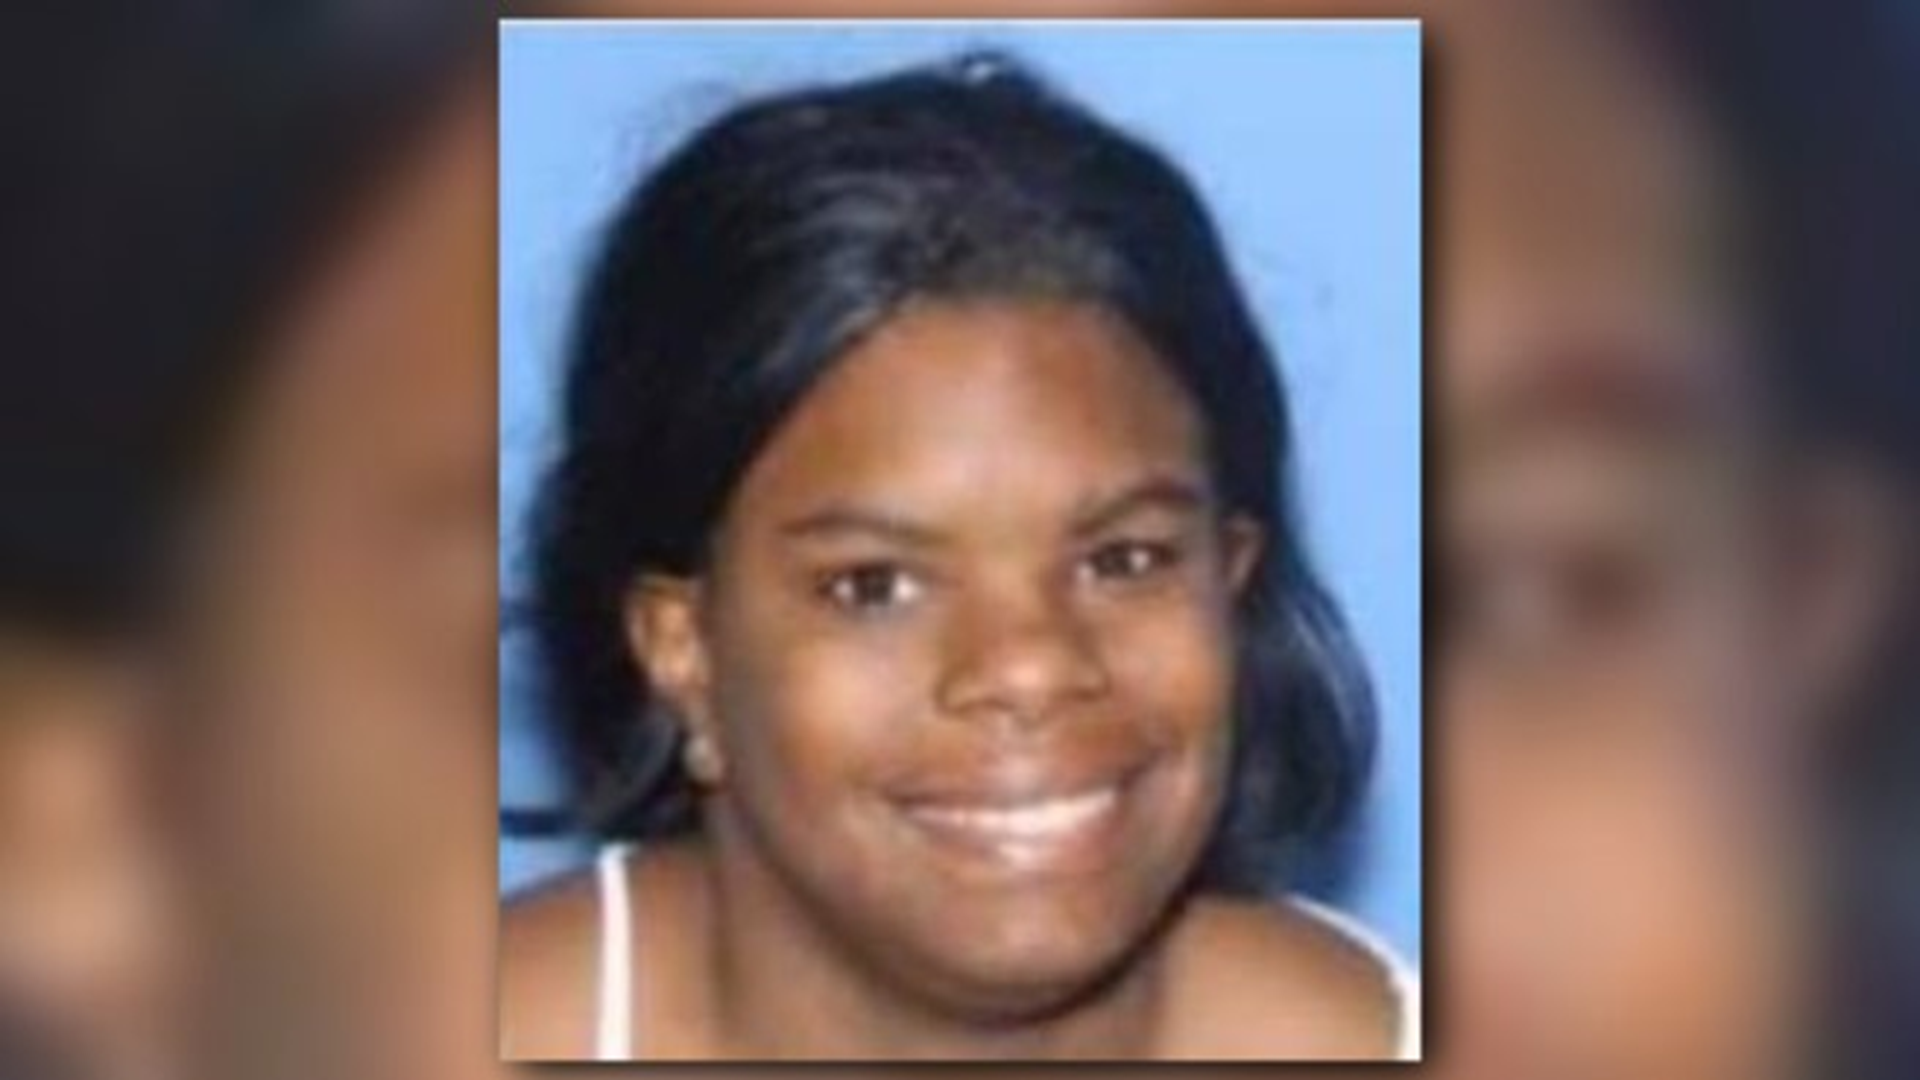 The Little Rock Police Department is asking for the public's help in finding missing 23-year-old Kadijah Breanna Cornelious.